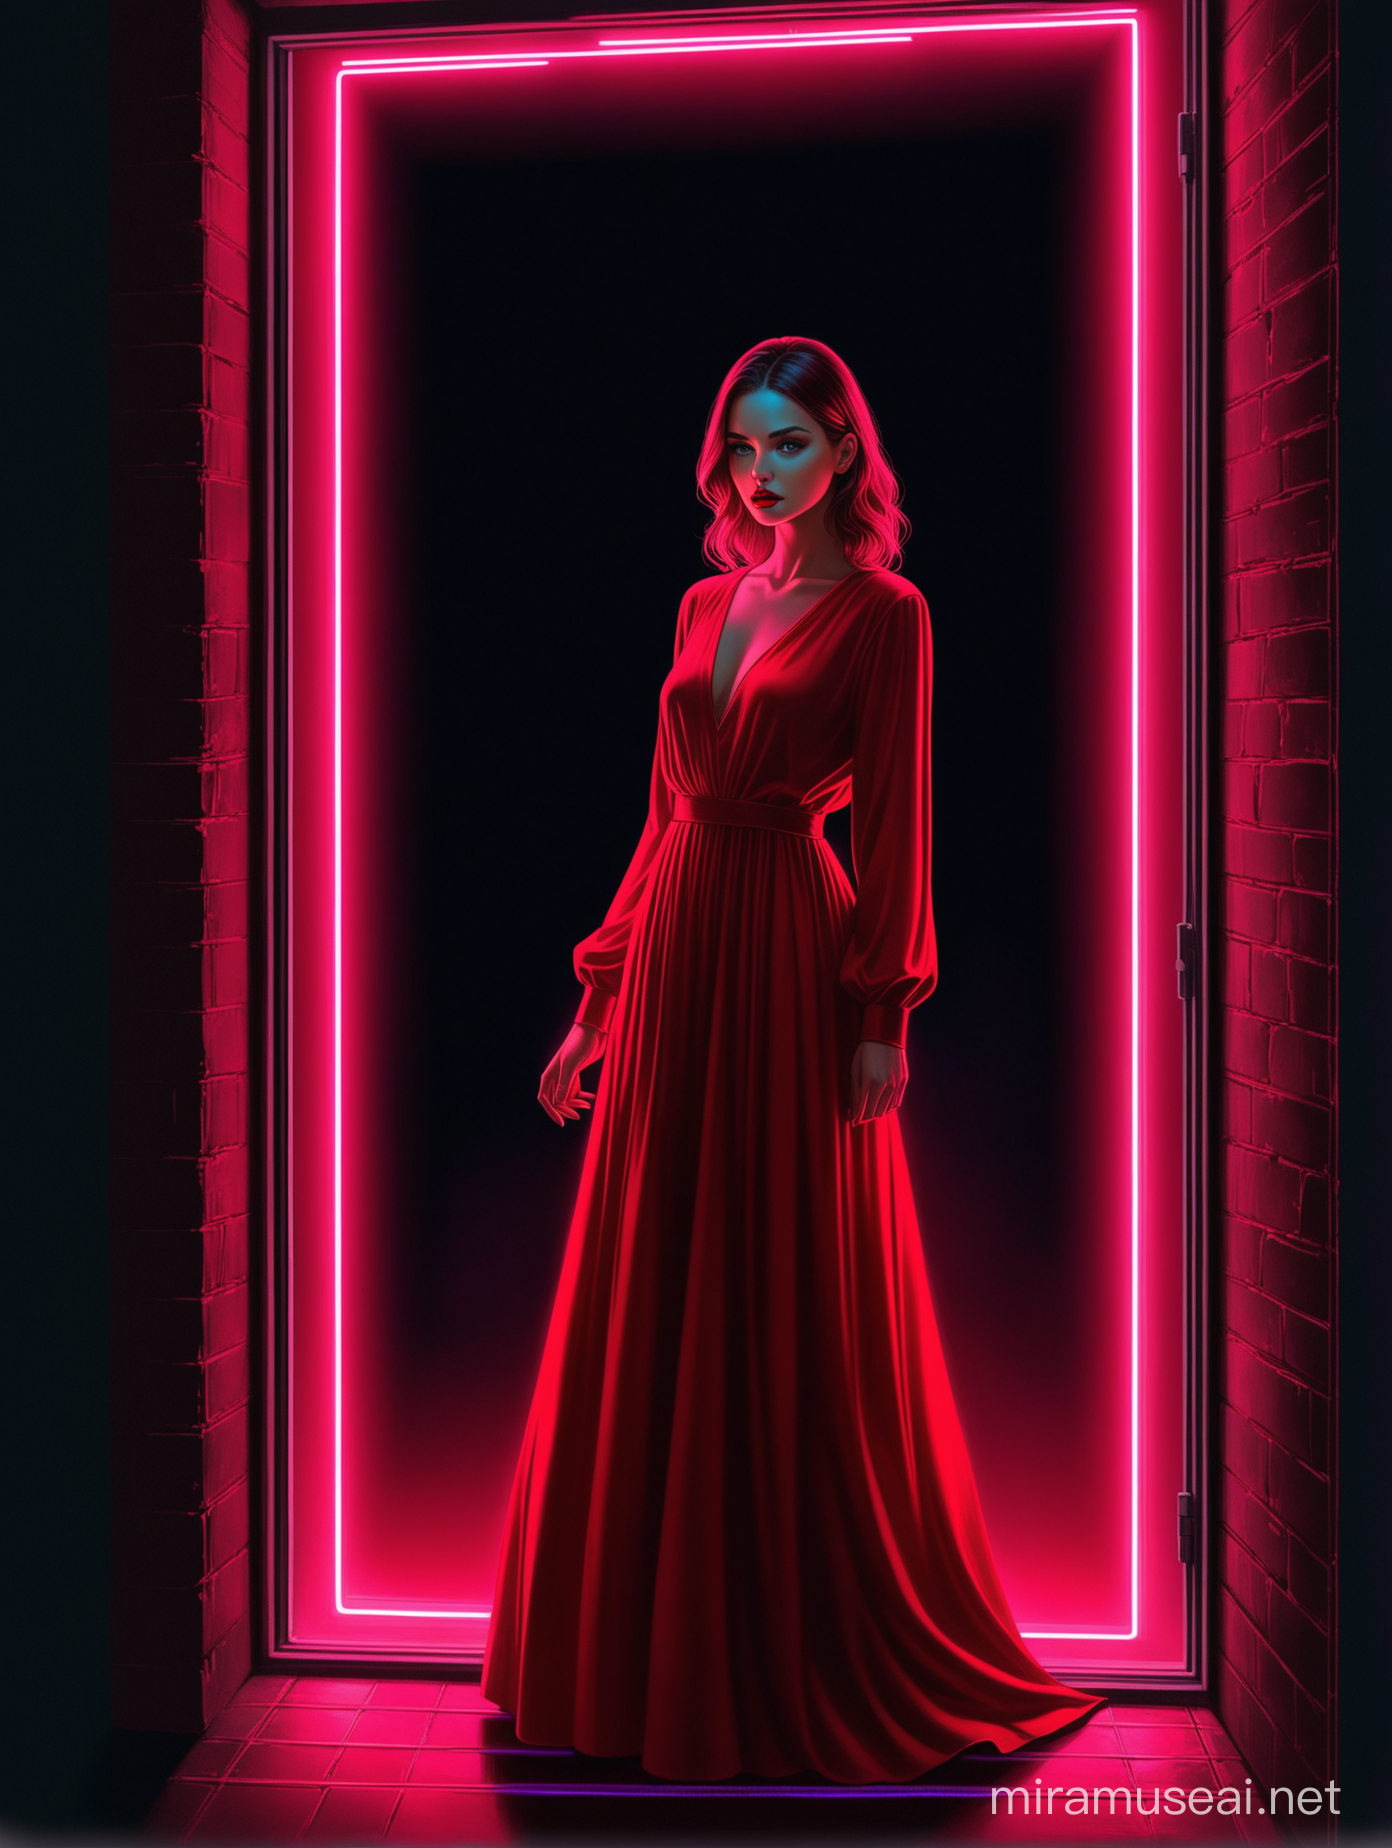 Aivision,neon colors, full body of beautiful young women, prety eyes, full red lips, she is wearing long  dress  With long sleeves, she looks out the window anxiously , dark environment(neon lighting from outside) , image realistic , Extremely detailed , intricate , beautiful , fantastic view , elegant , crispy quality Federico Bebber's expressive